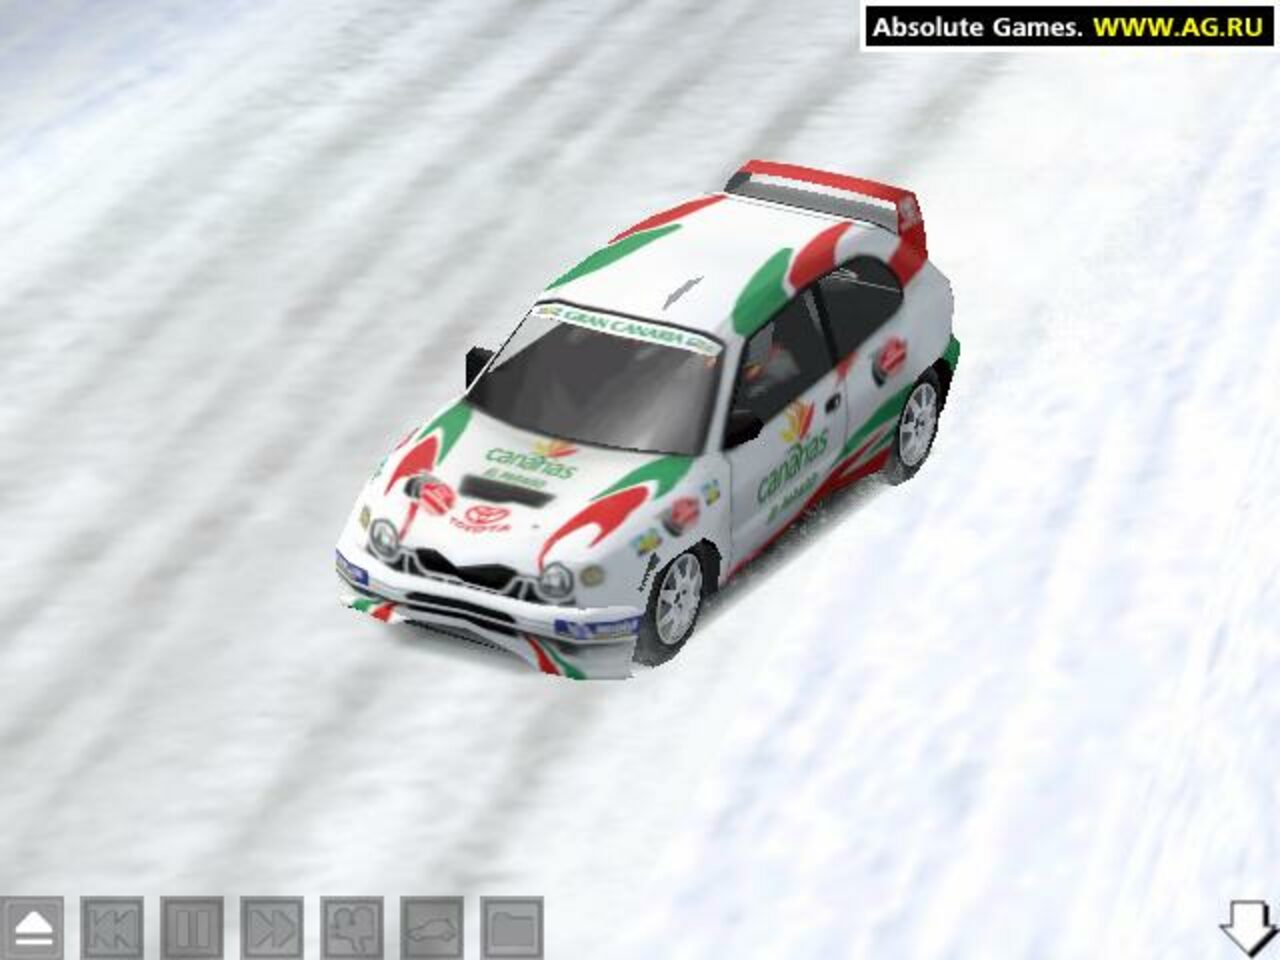 Rally Fusion: Race of Champions PlayStation 2